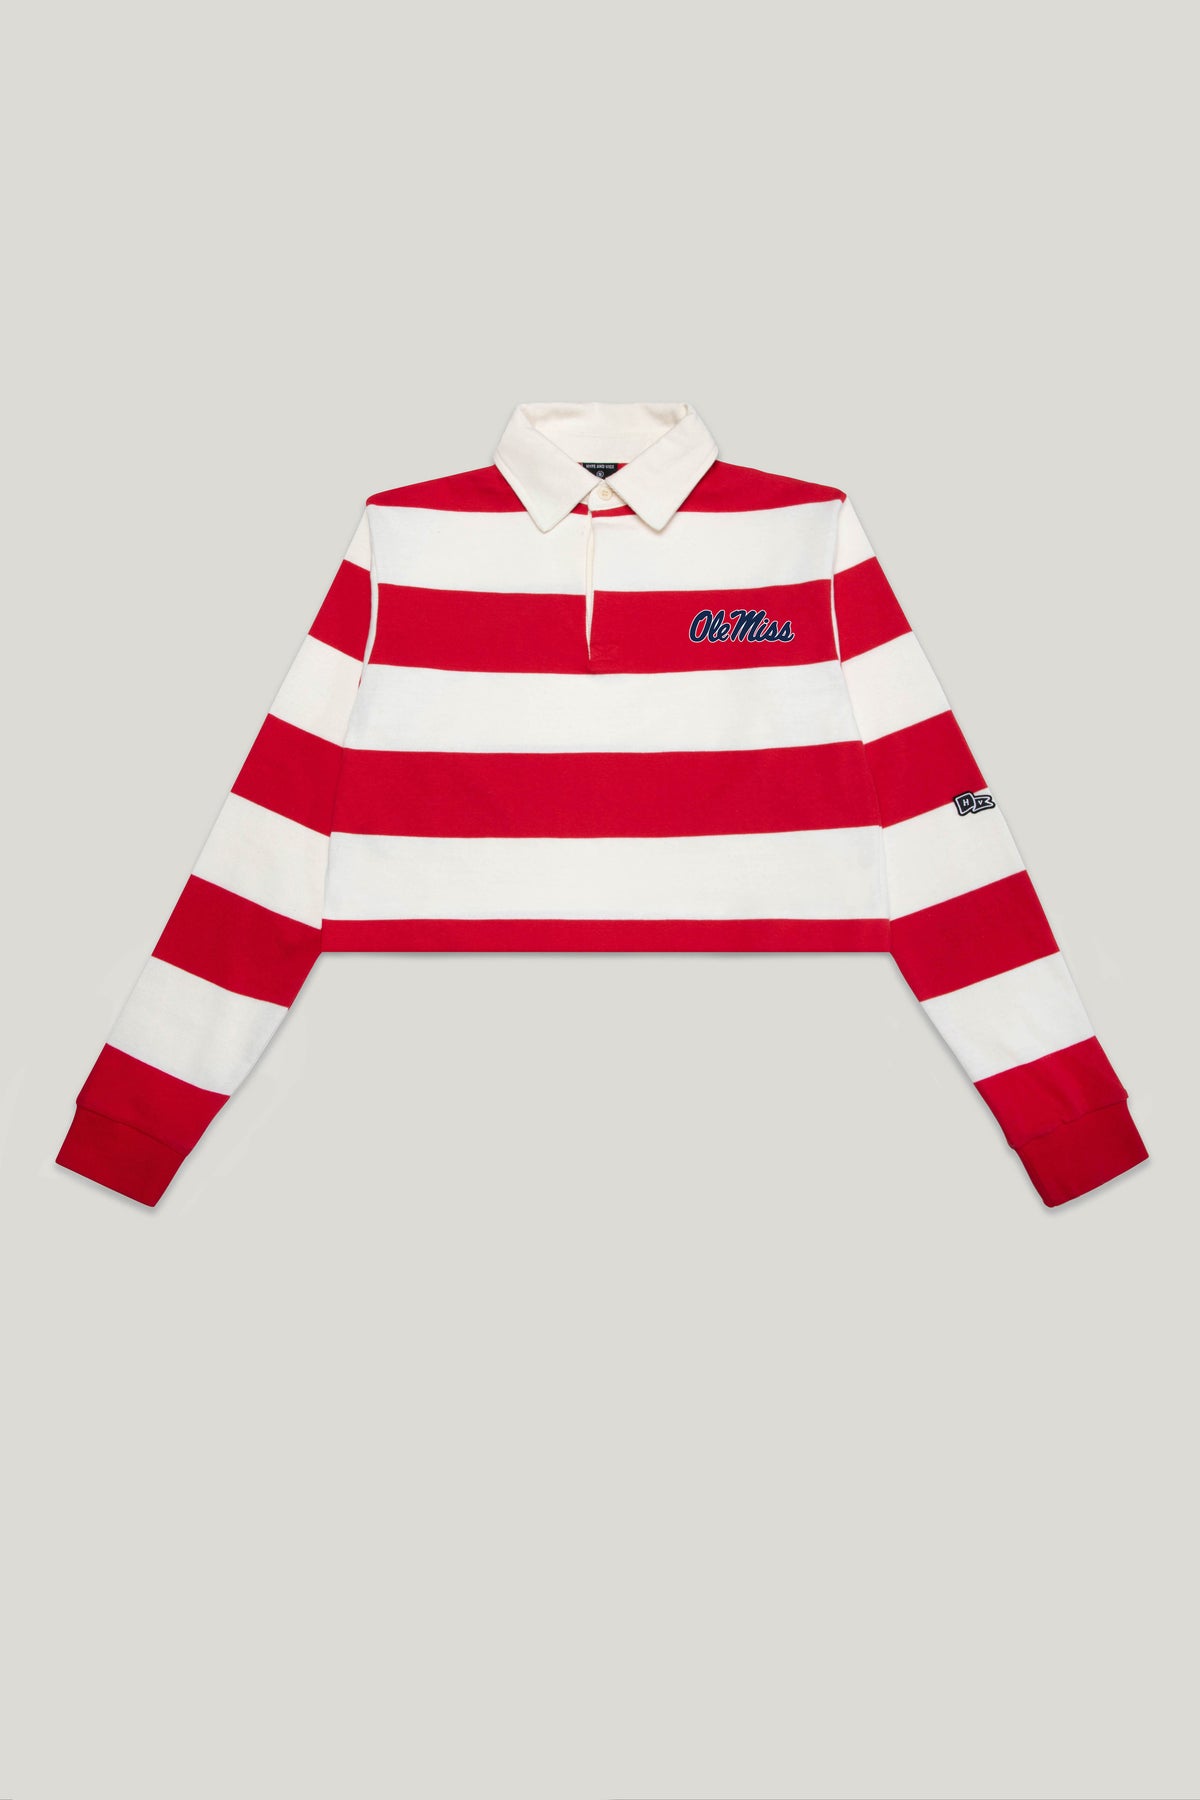 Ole Miss Rugby Top